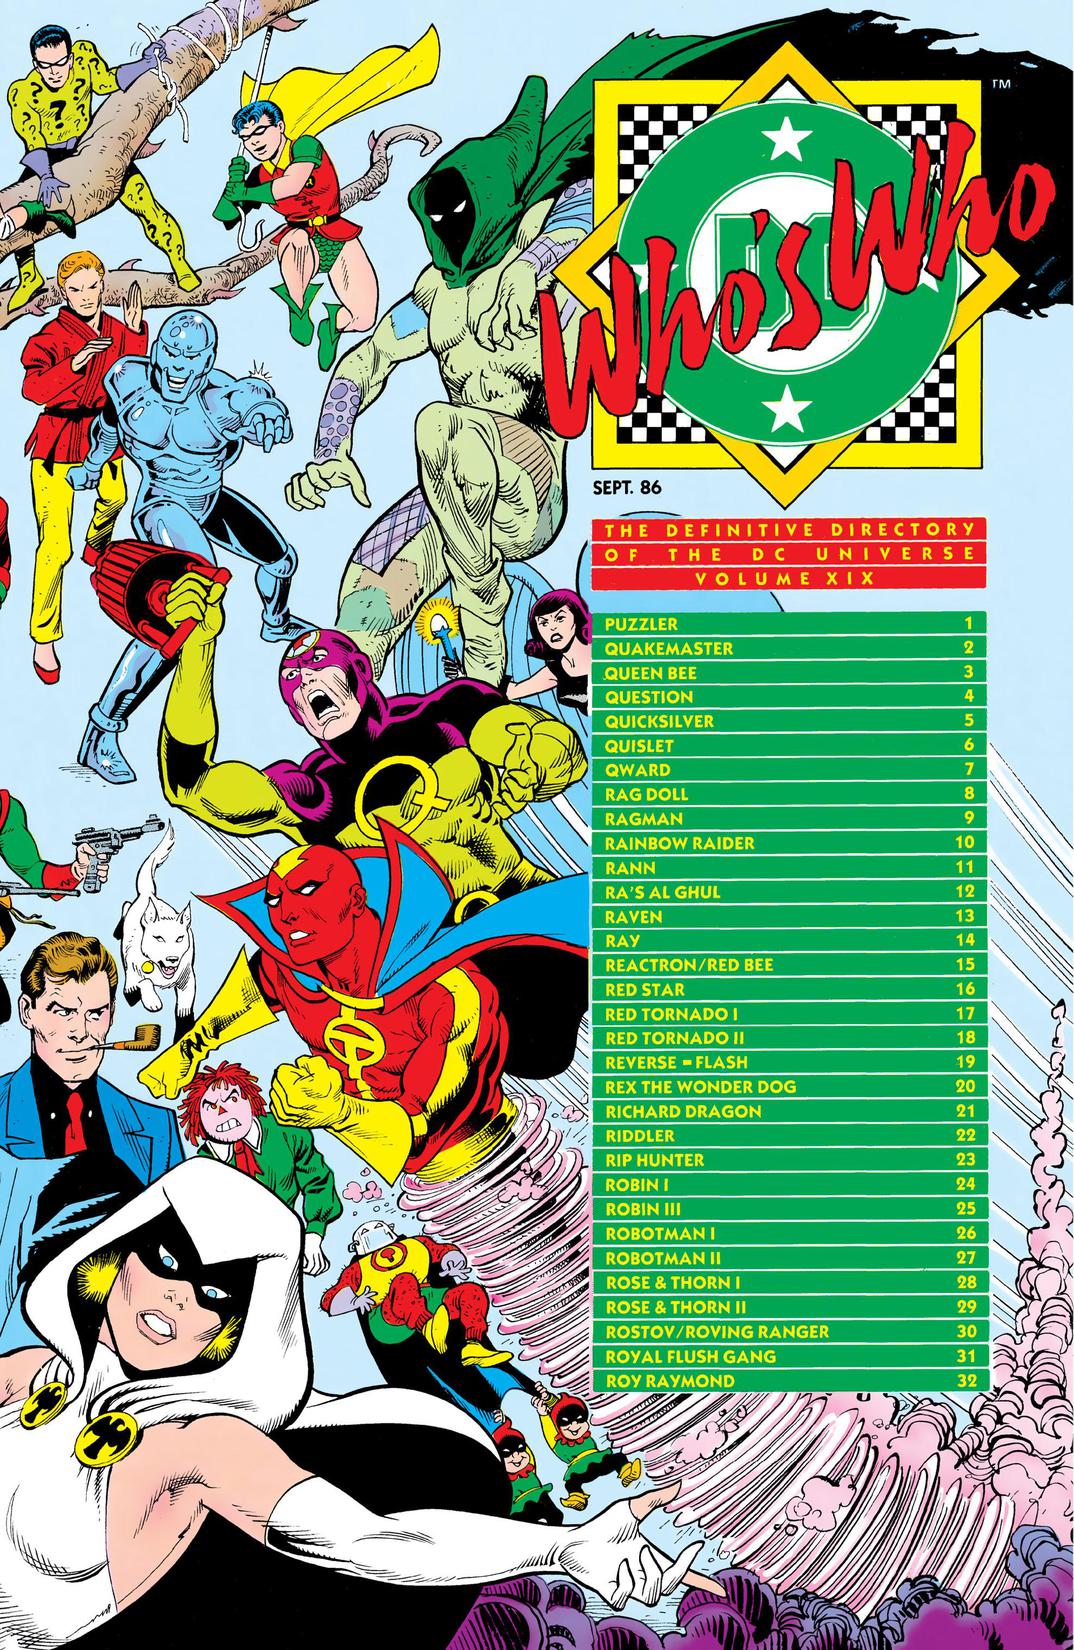 Who's Who: The Definitive Directory of the DC Universe #19 preview images